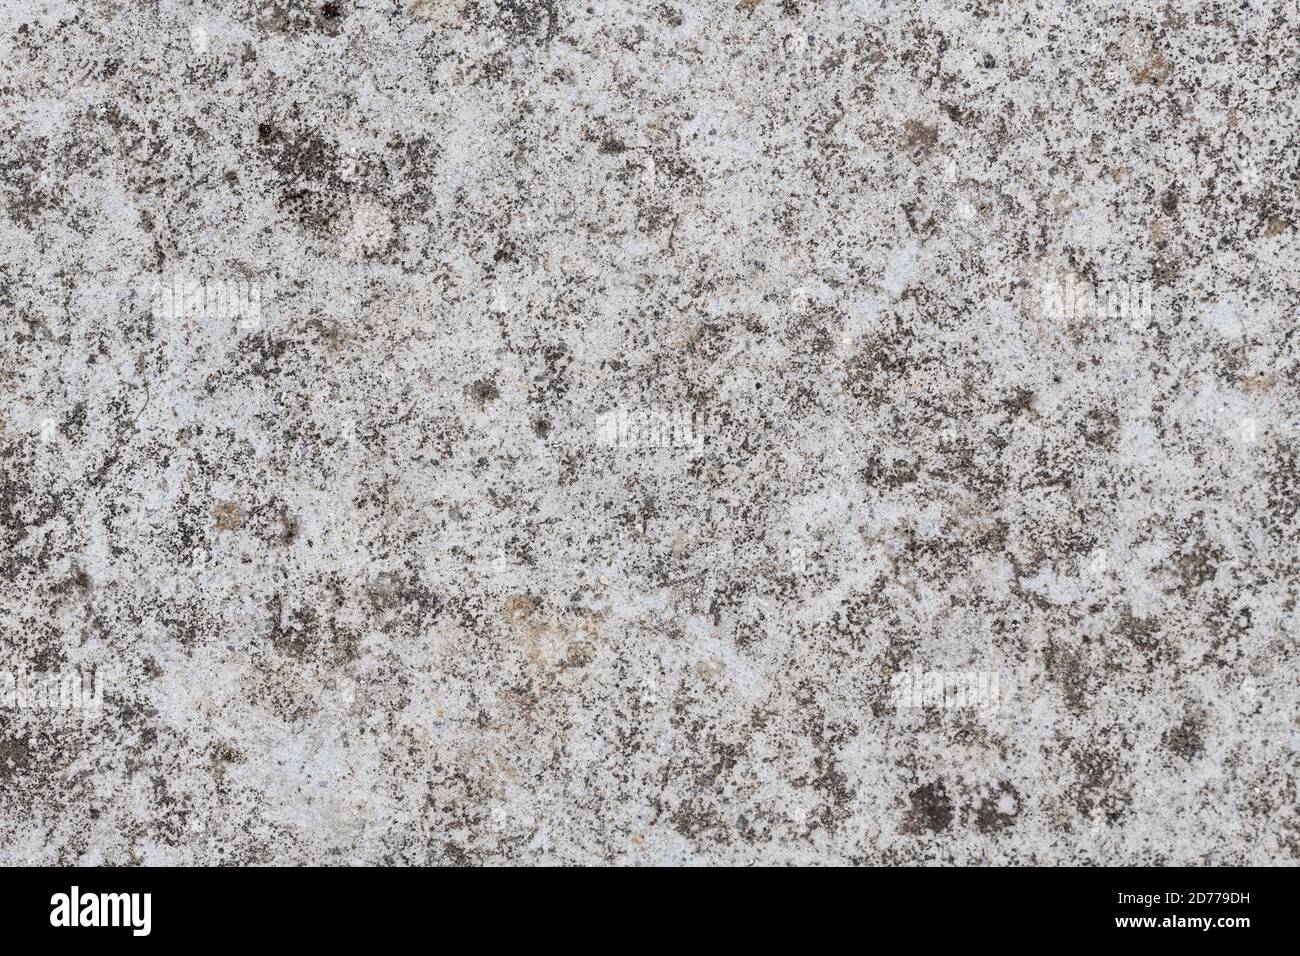 Smooth concrete cement surface stained by weathering mildews etc. Only laid down about 3 years ago. Gritty concrete surface texture. Stock Photo